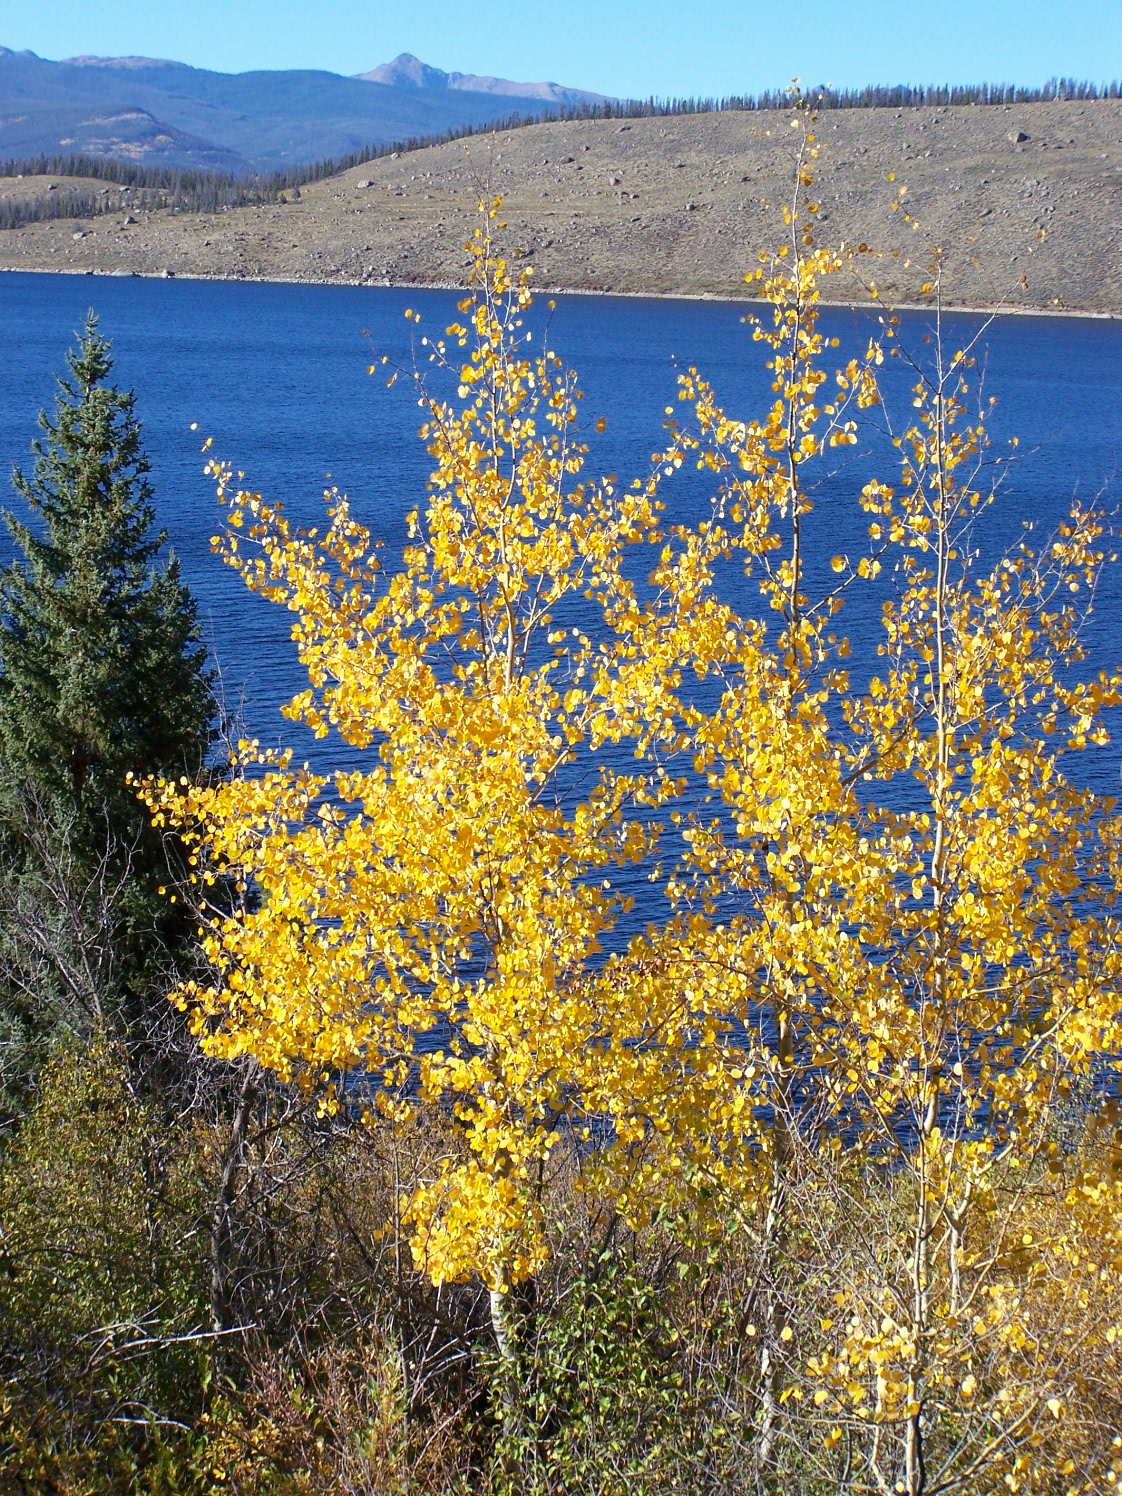 Fall colors contract with the deep blue of the reservoir.